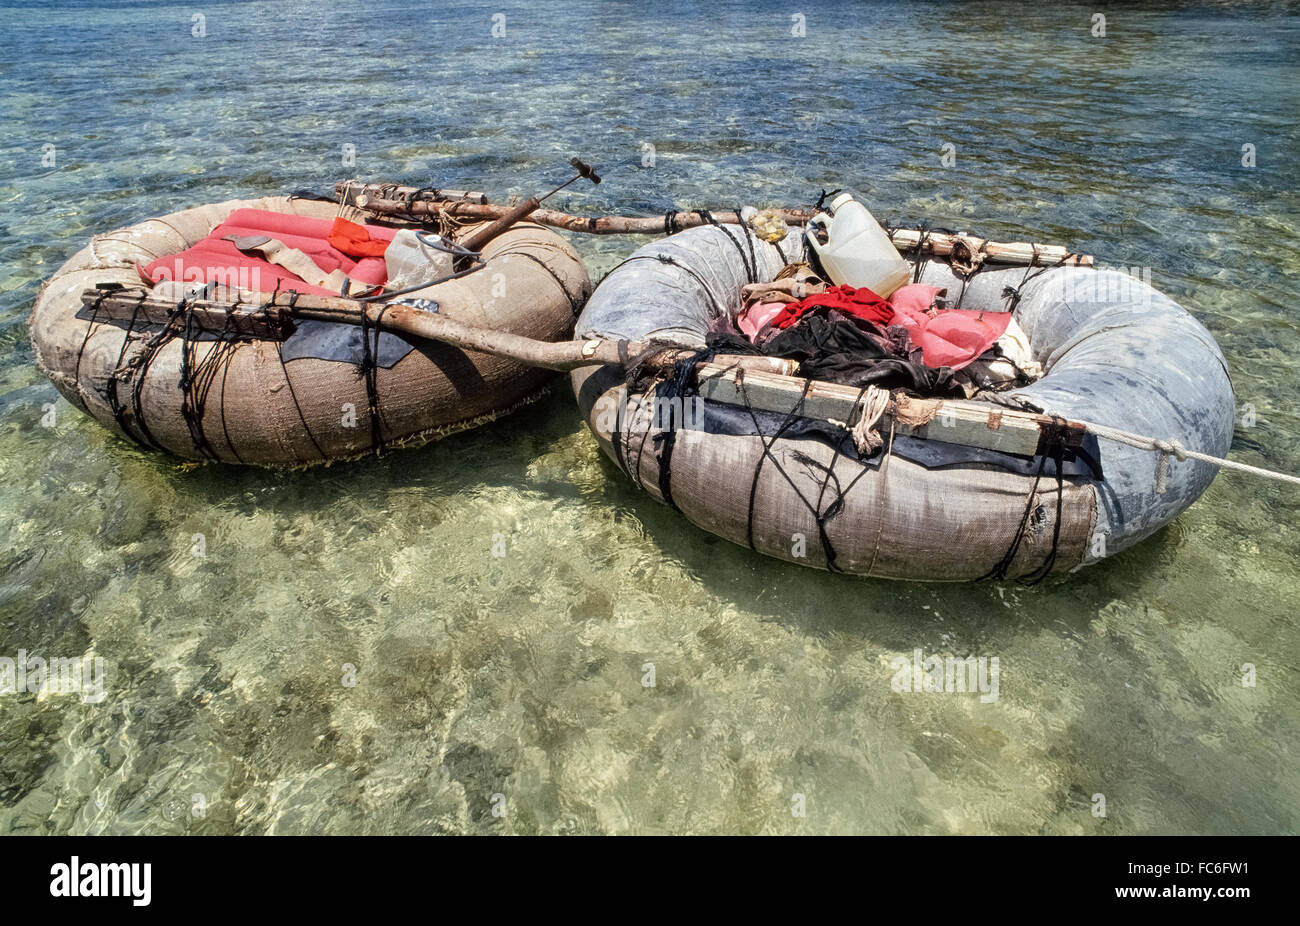 Refugees from Cuba abandoned this makeshift raft after making a 90-mile ocean journey to reach the United States shore at Islamorada in the Florida Keys and automatically qualify to become U.S. residents. Under U.S. law, any Cuban refugee caught at sea is sent back home, while those who make it ashore are granted permanent legal status after one year and the right to apply for citizenship after five years. An increase in Cuban refugees has occurred ever since the U.S. resumed diplomatic ties with Cuba in 2015. Stock Photo